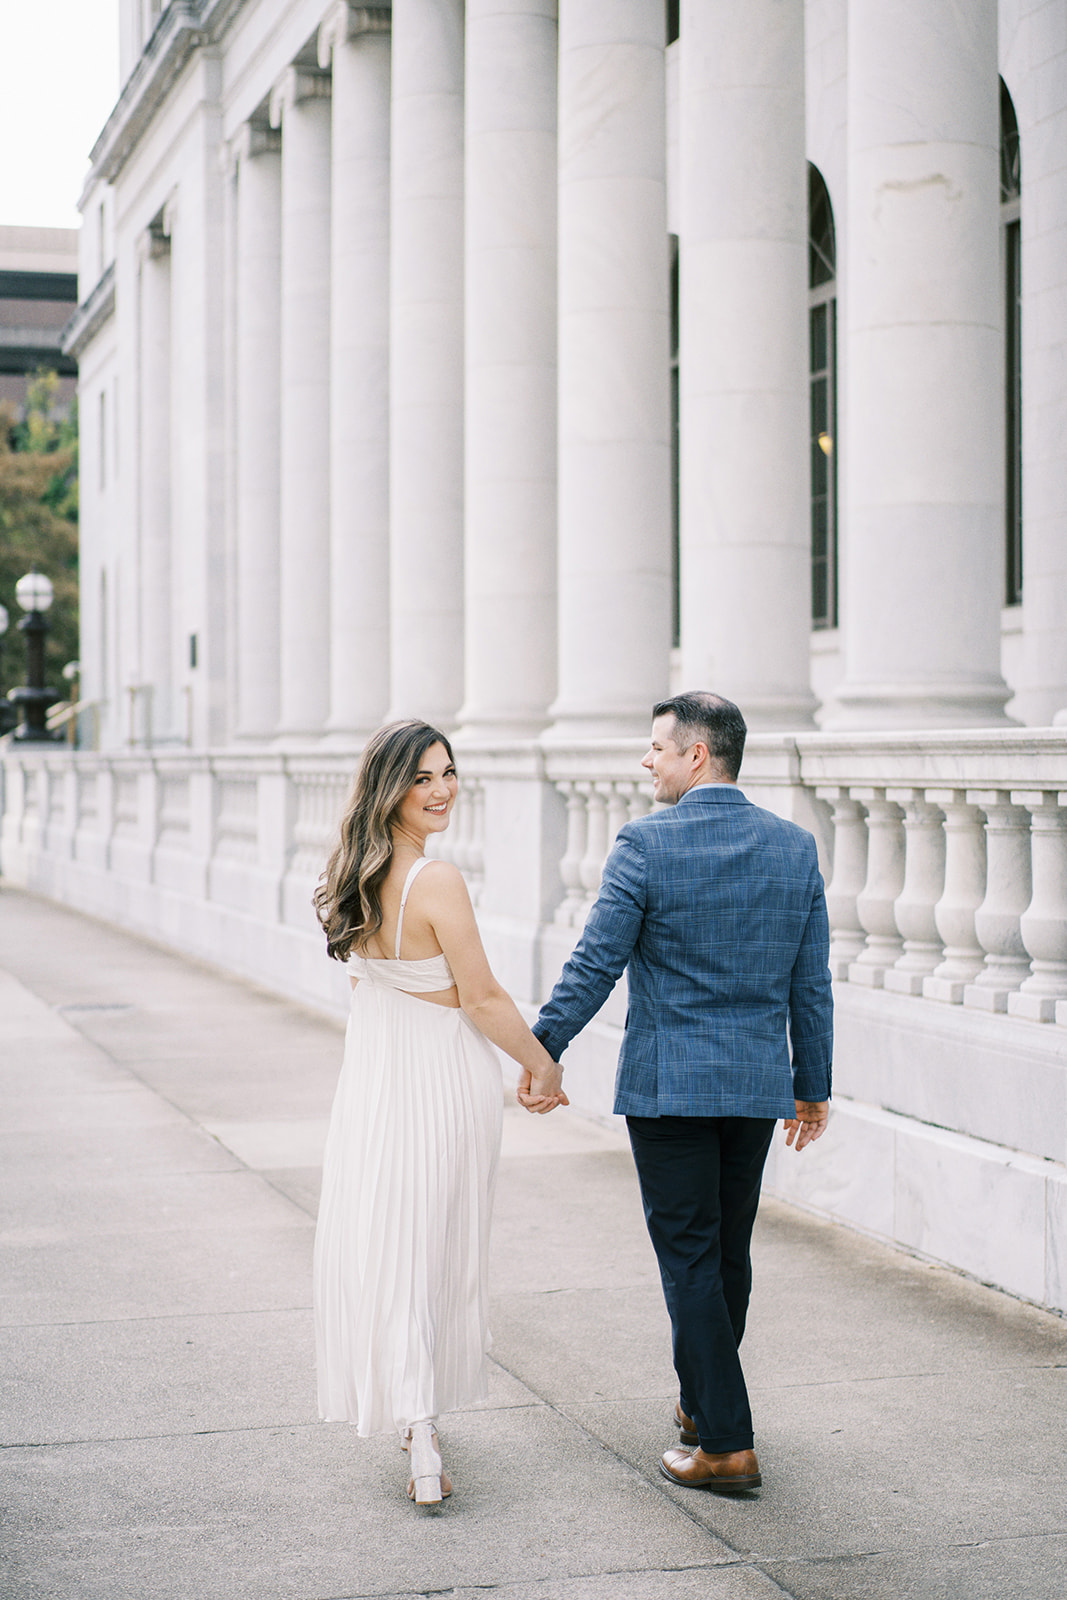 A couple walks down the street during a romantic engagement session in front of the Robert S. Vance Federal Building